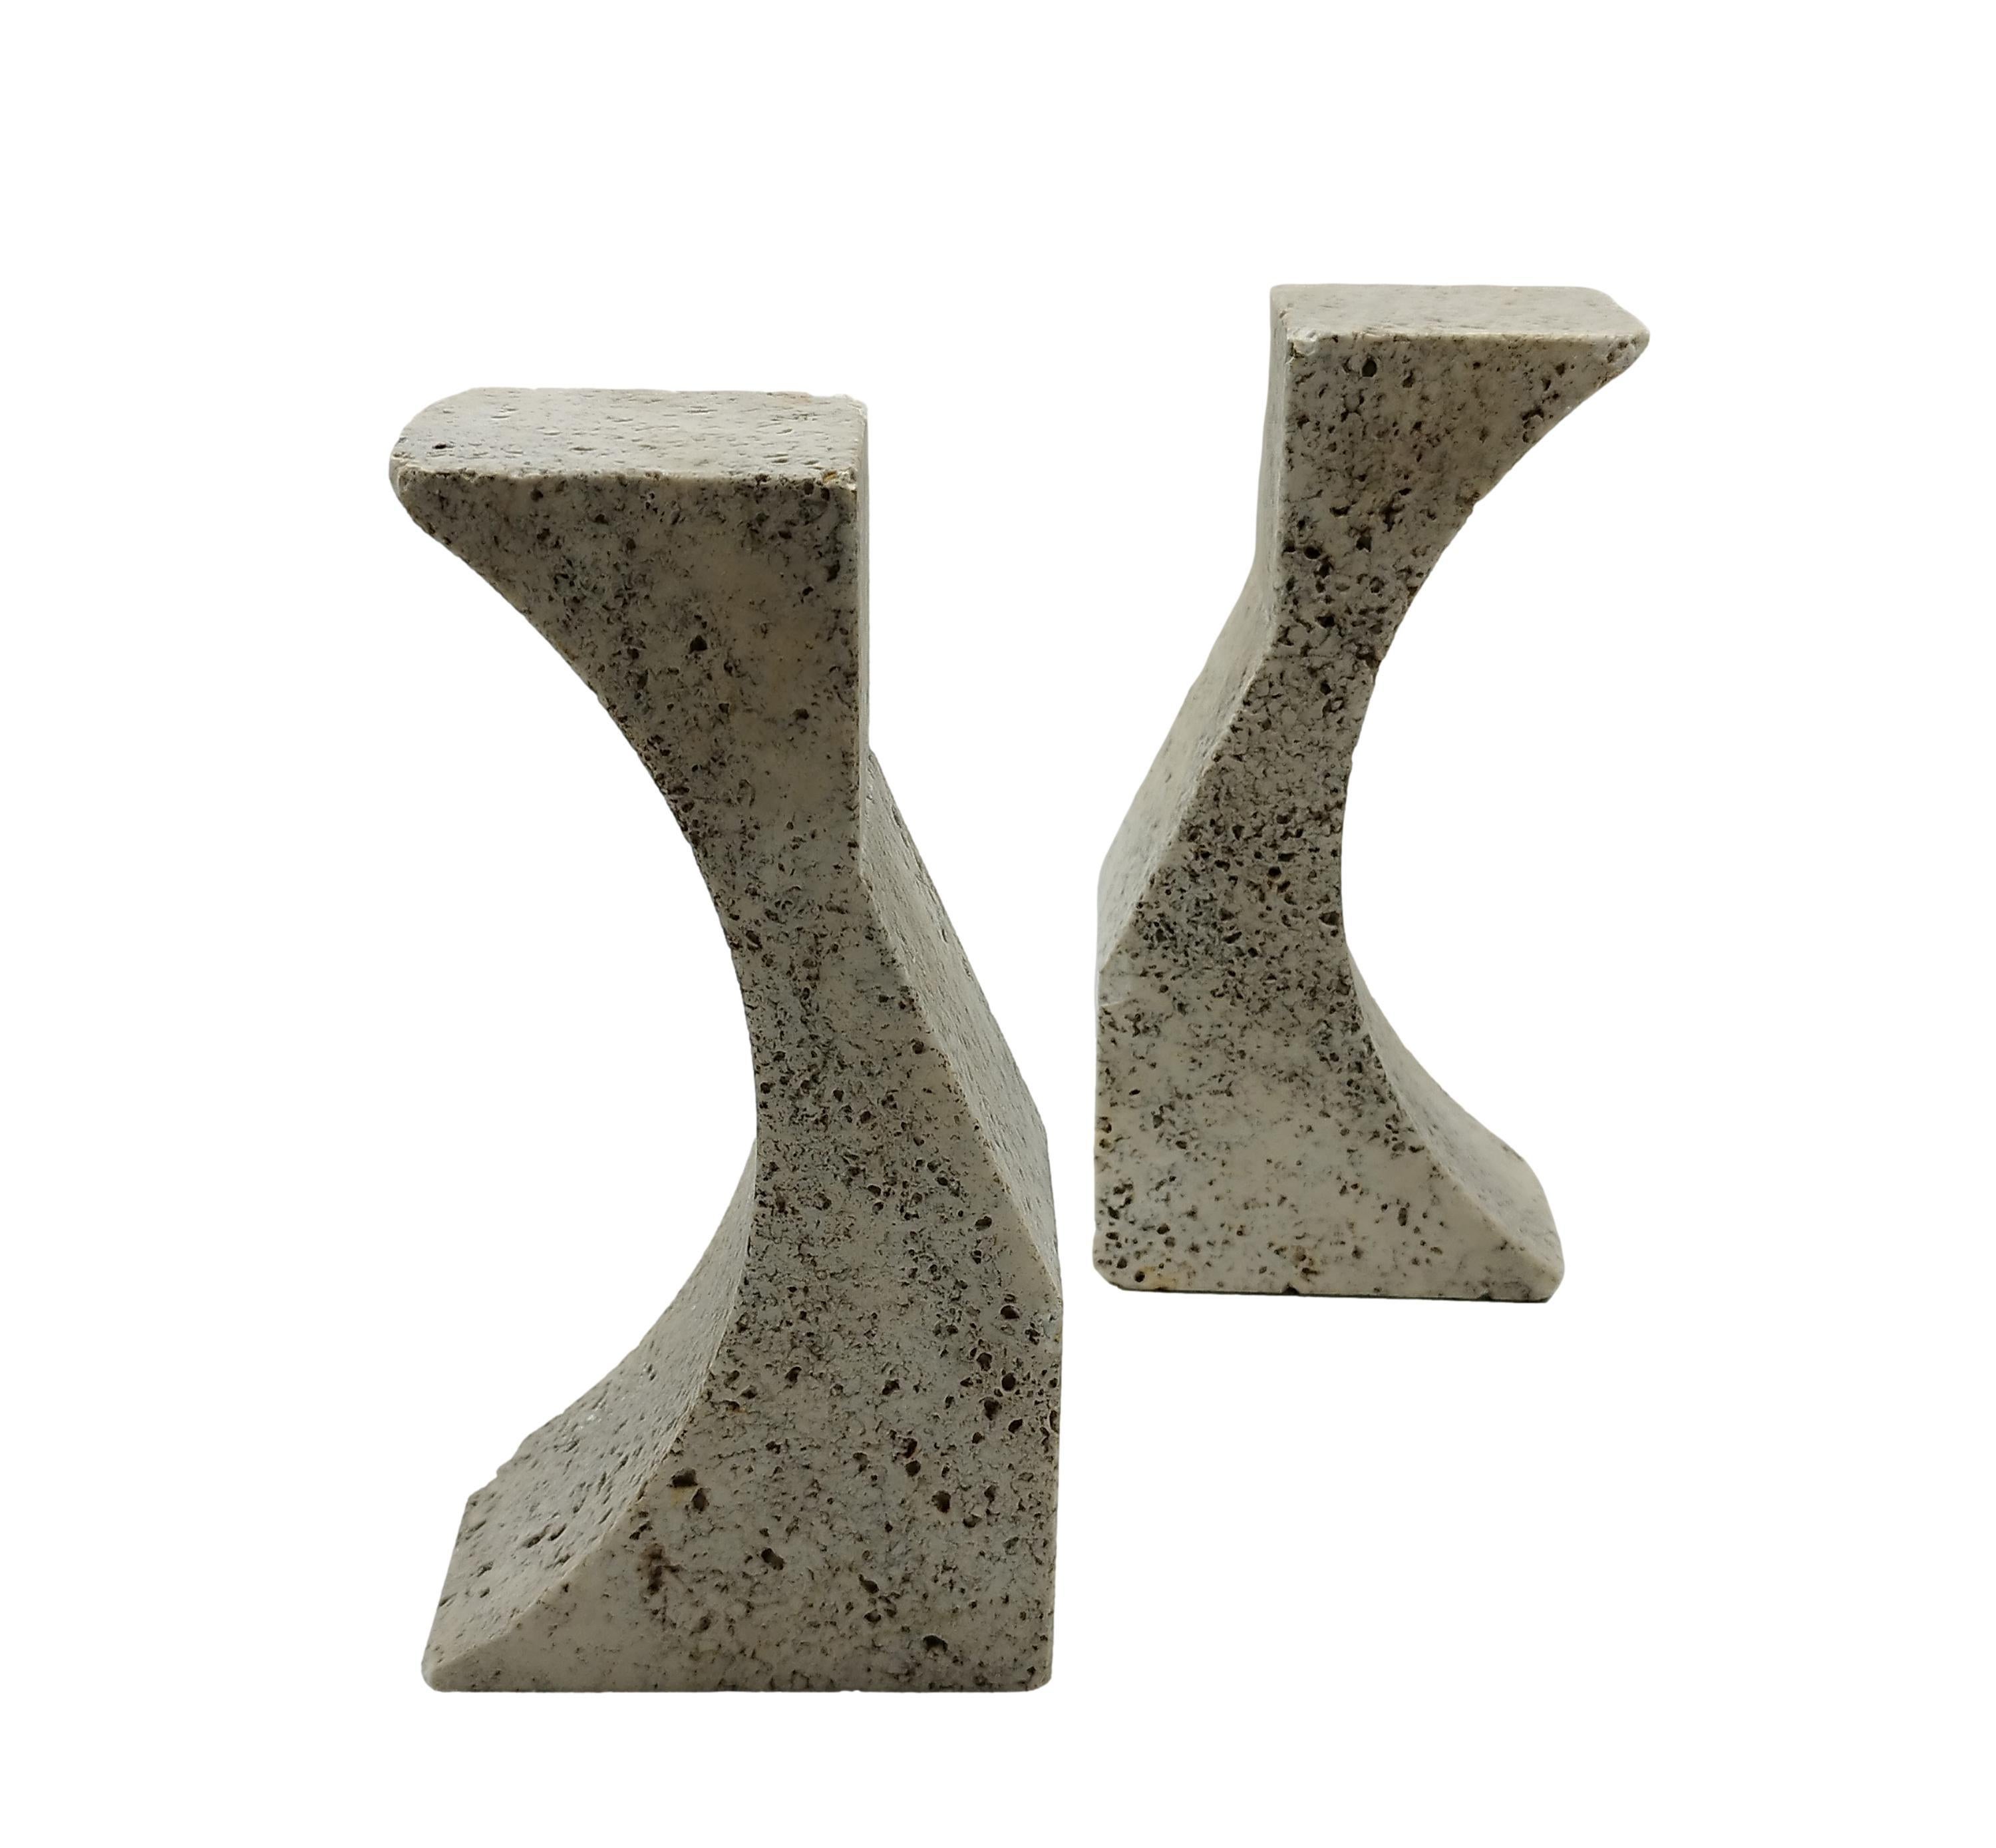 Pair of stone bookends by Fratelli Manelli.  
 Made from exquisite Rapolano Travertine, a type of Italian travertine known for its distinctive cream color and delicate veining. 